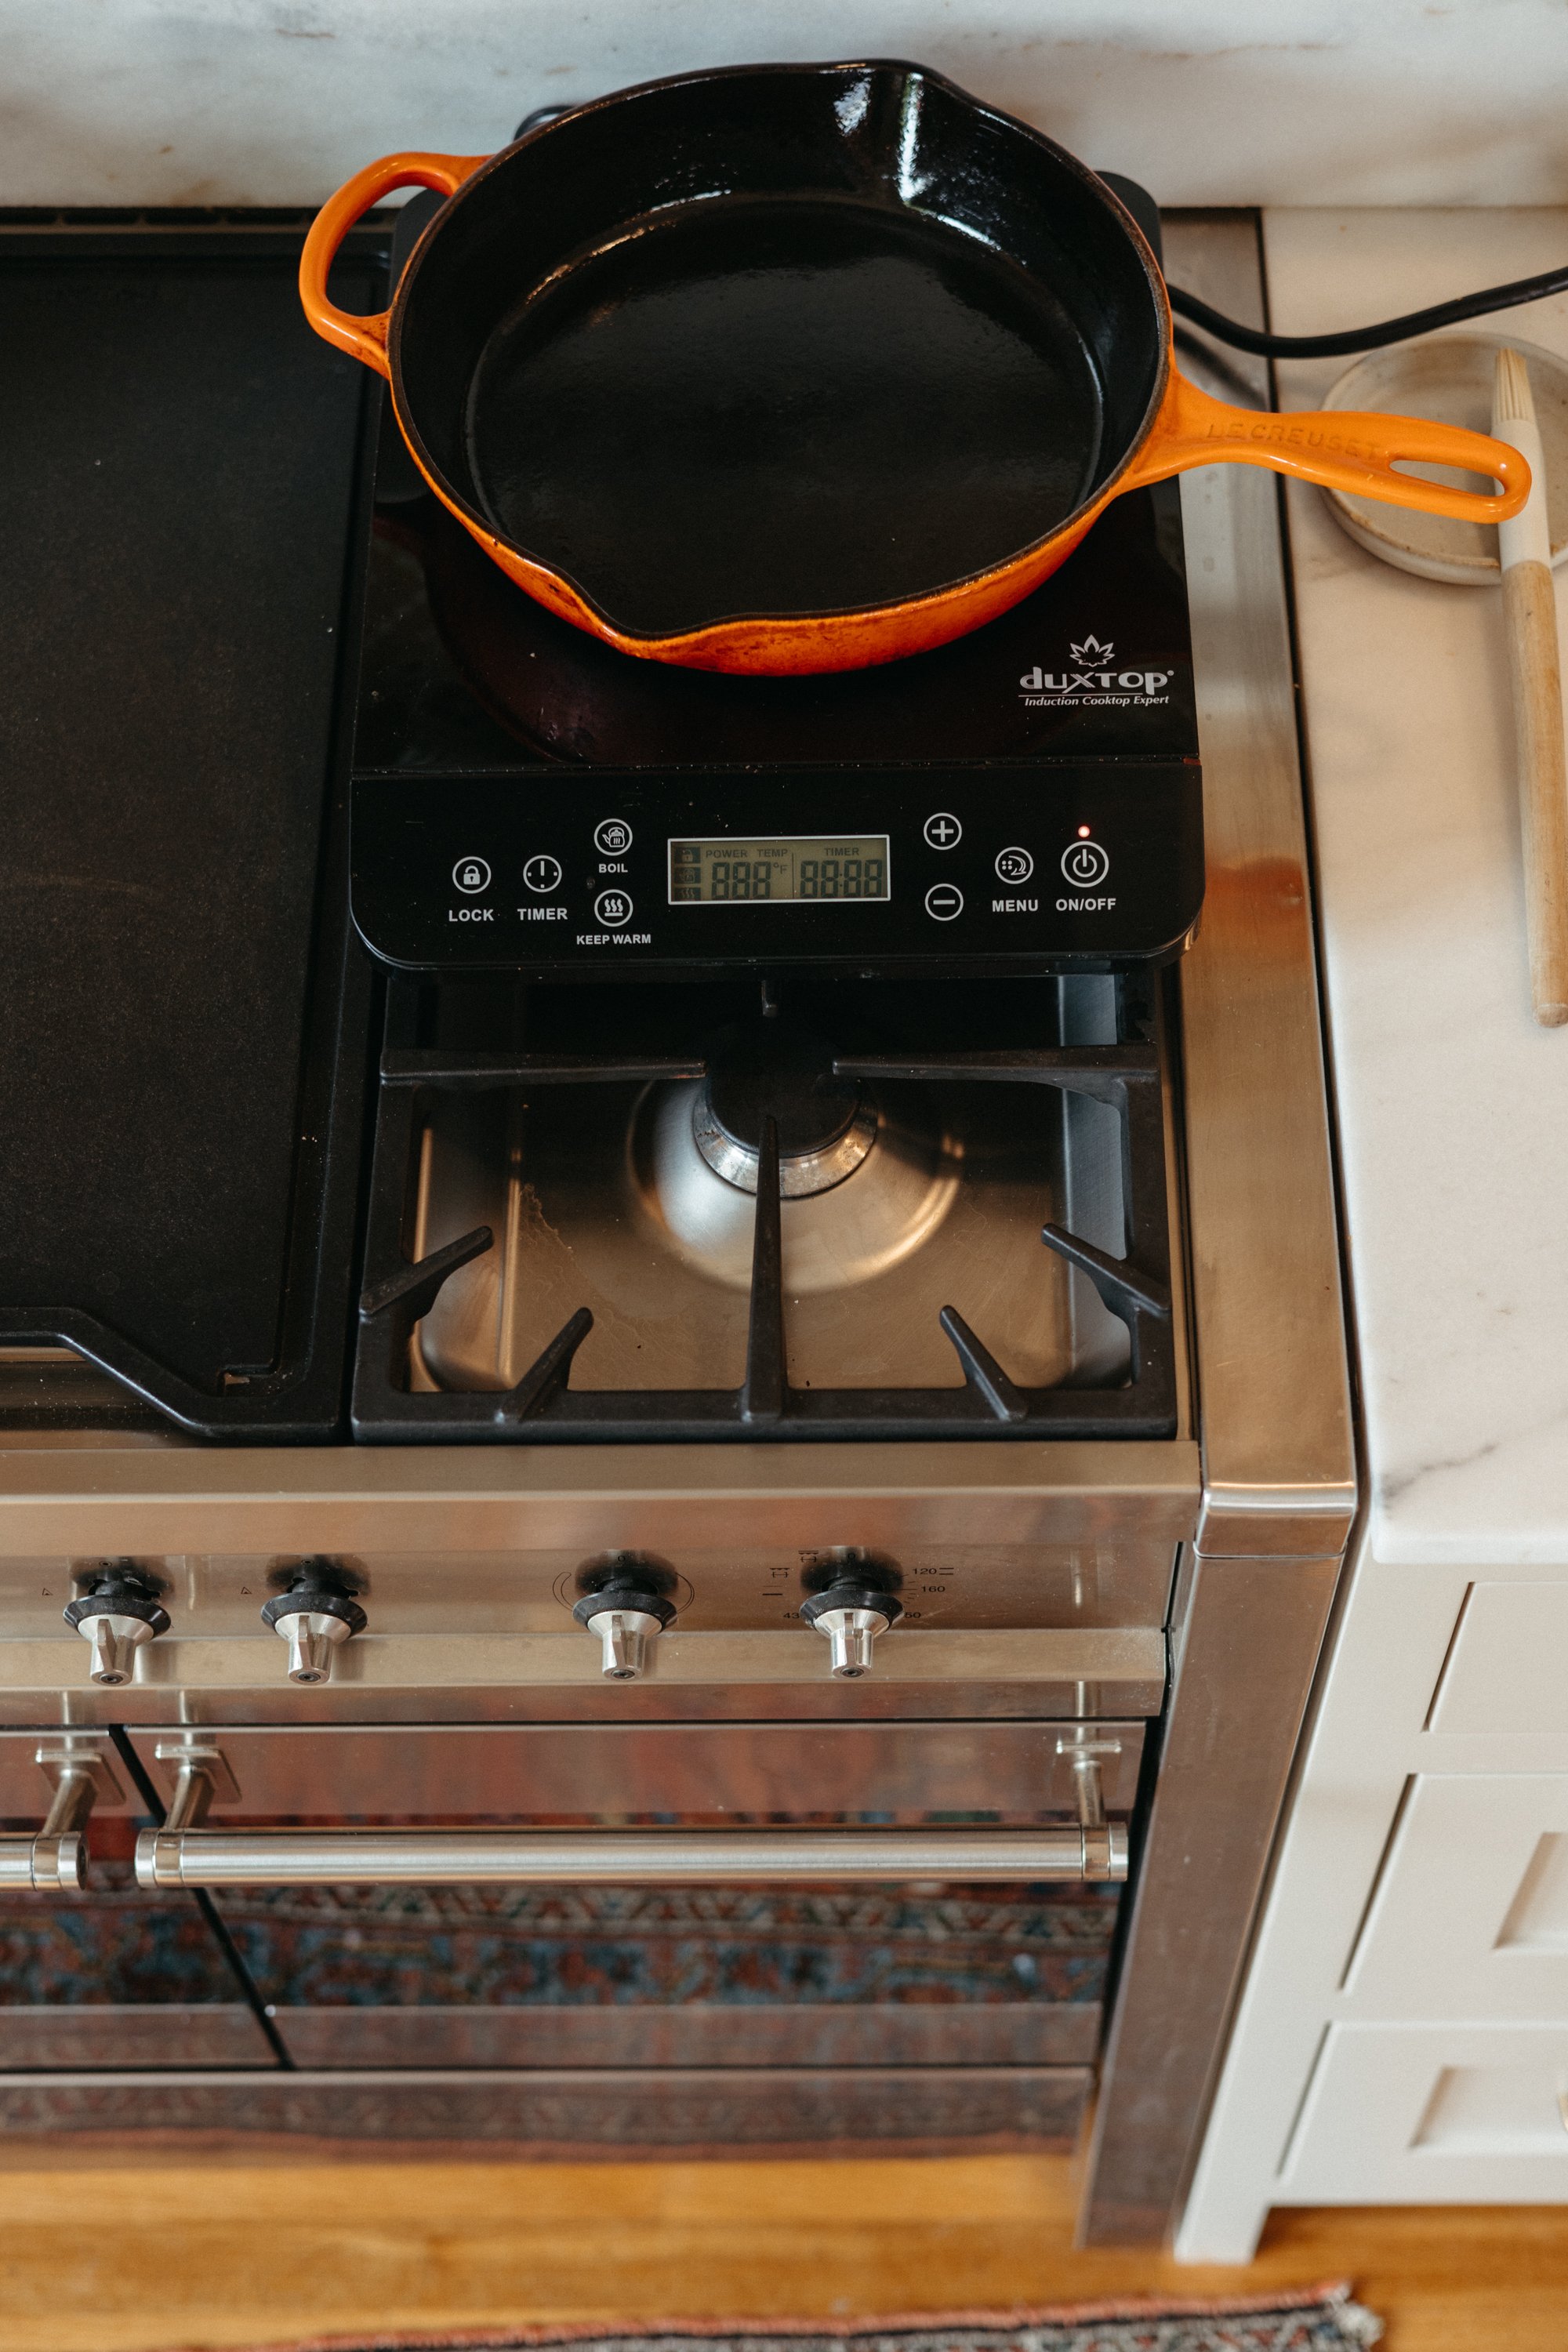 My Family Switched to Induction Cooking and We'd Never Go Back